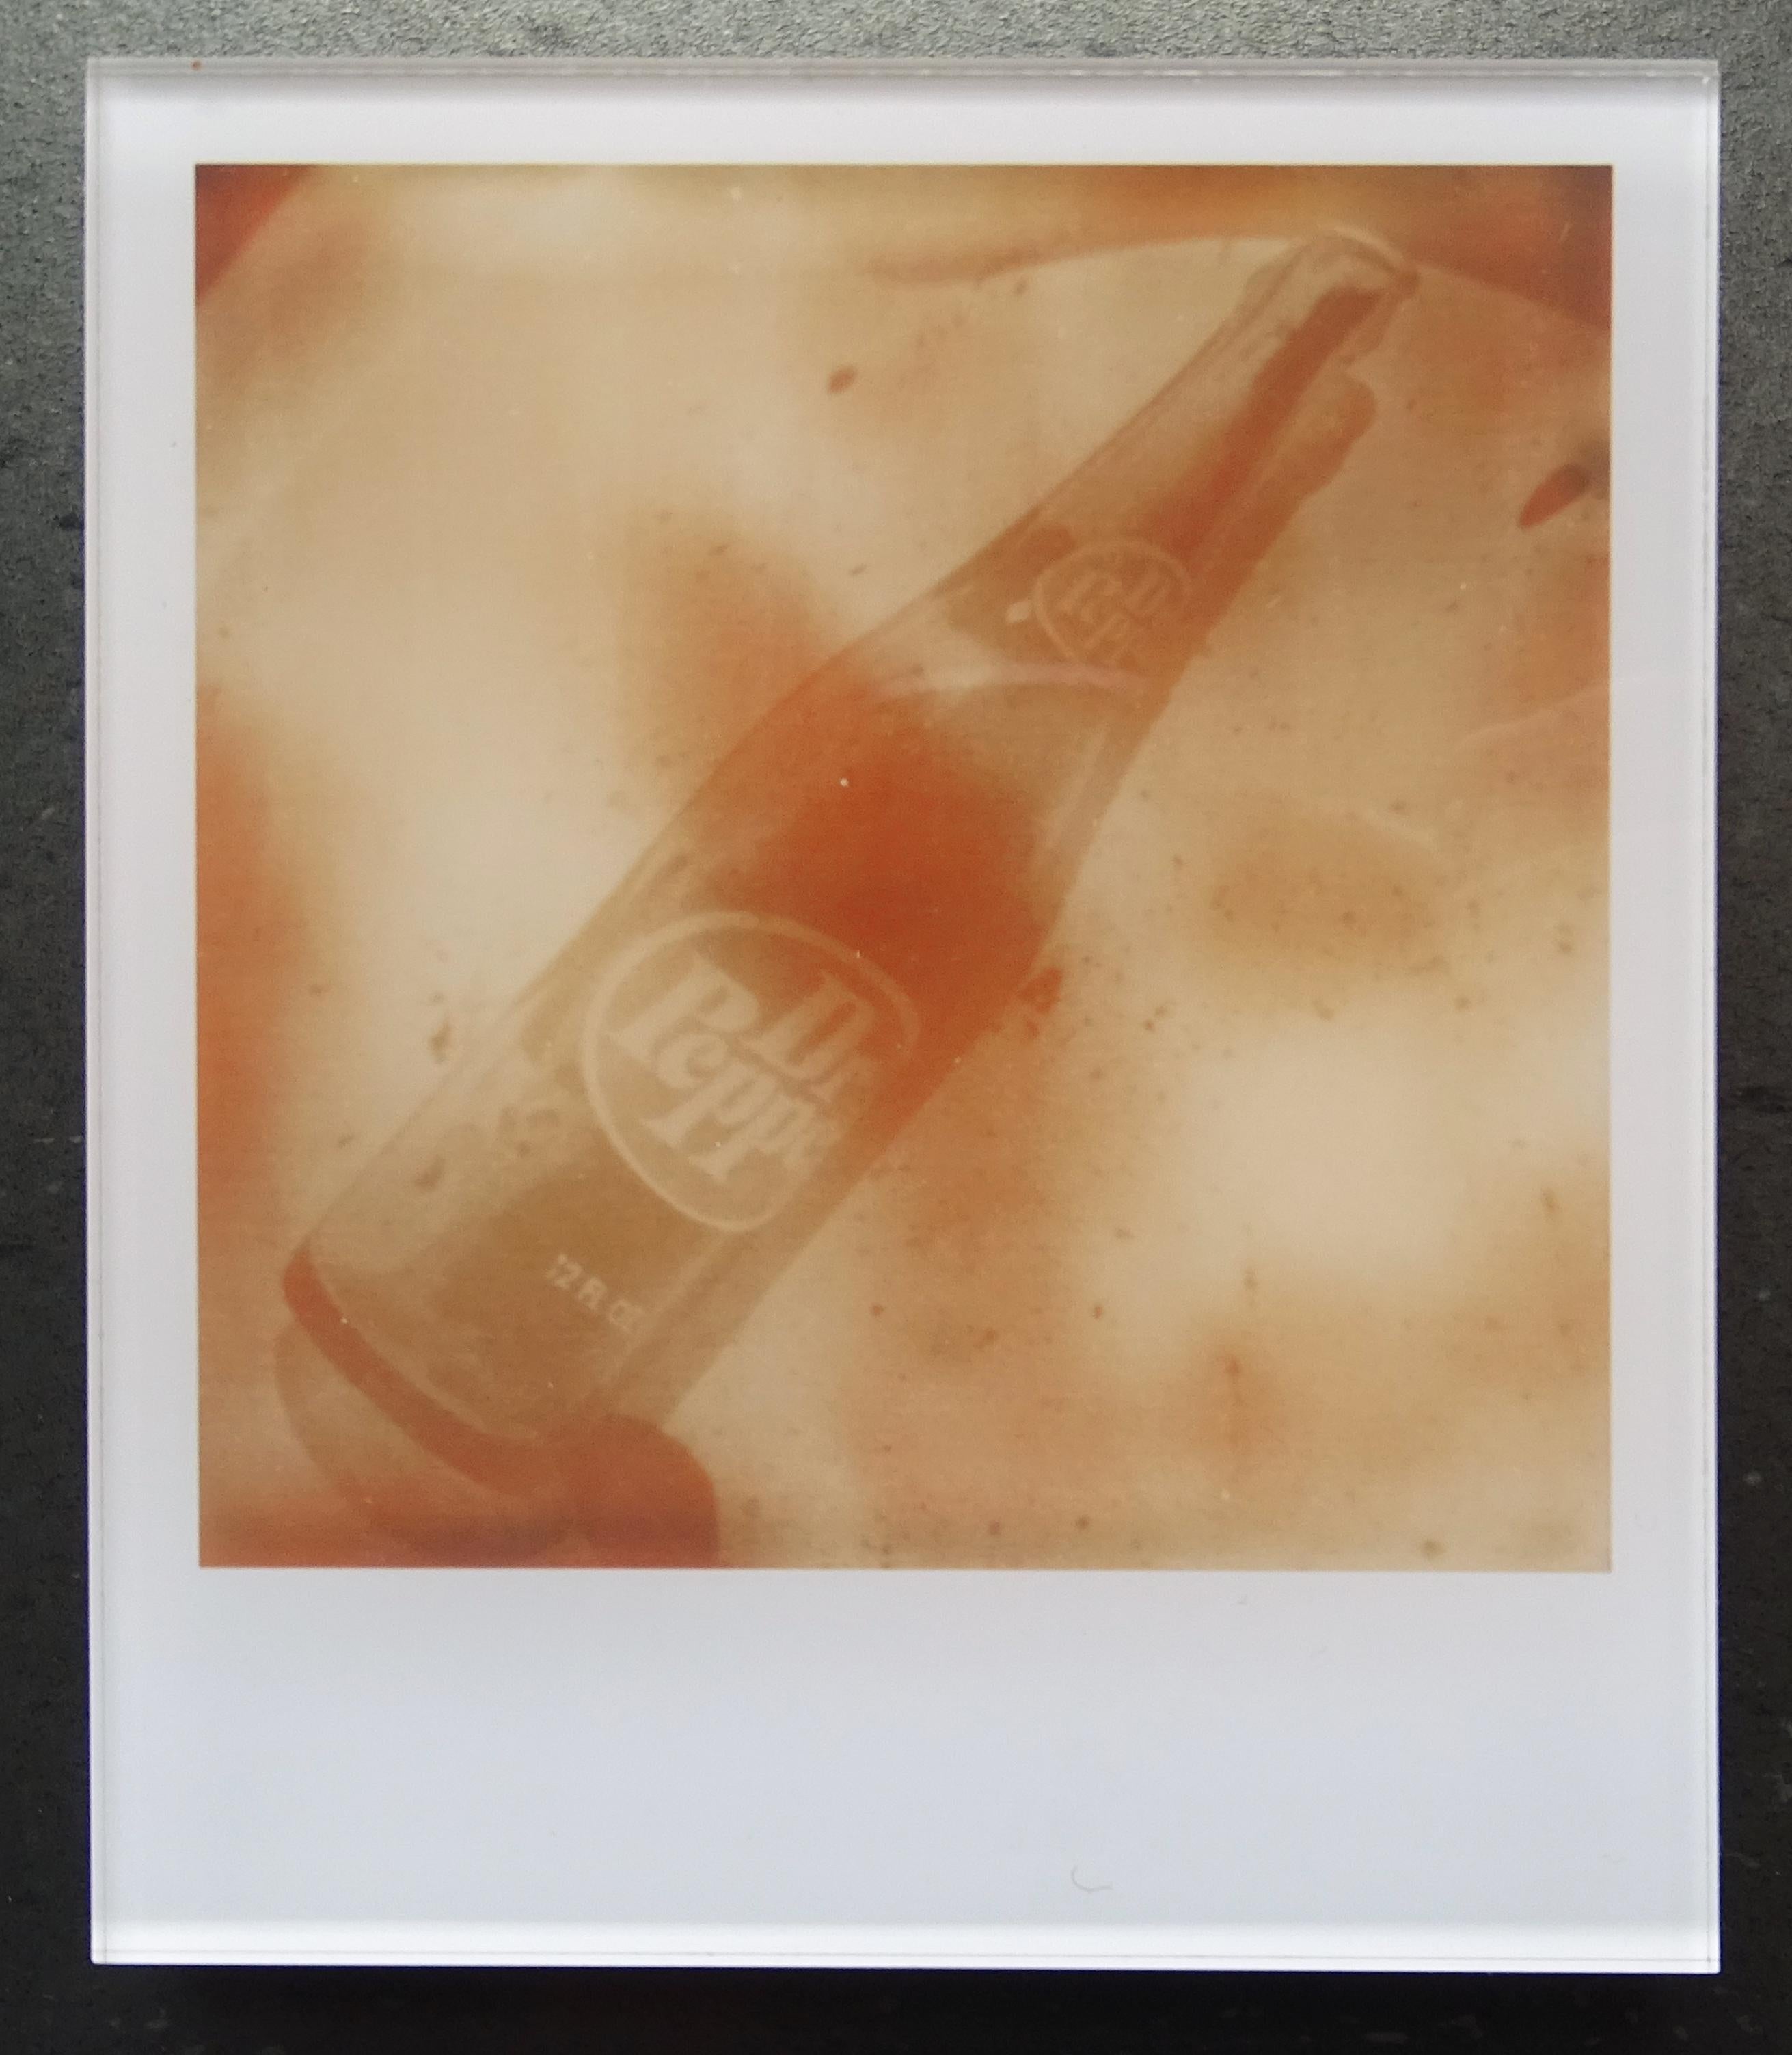 Stefanie Schneider's Minis
Dr. Pepper (Oxana's 30th Birthday) - 2008

Signed and signature brand on verso.
Lambda digital Color Photographs based on the Polaroid.
Sandwiched in between Plexiglass (thickness 0.7cm)

Polaroid sized open Editions